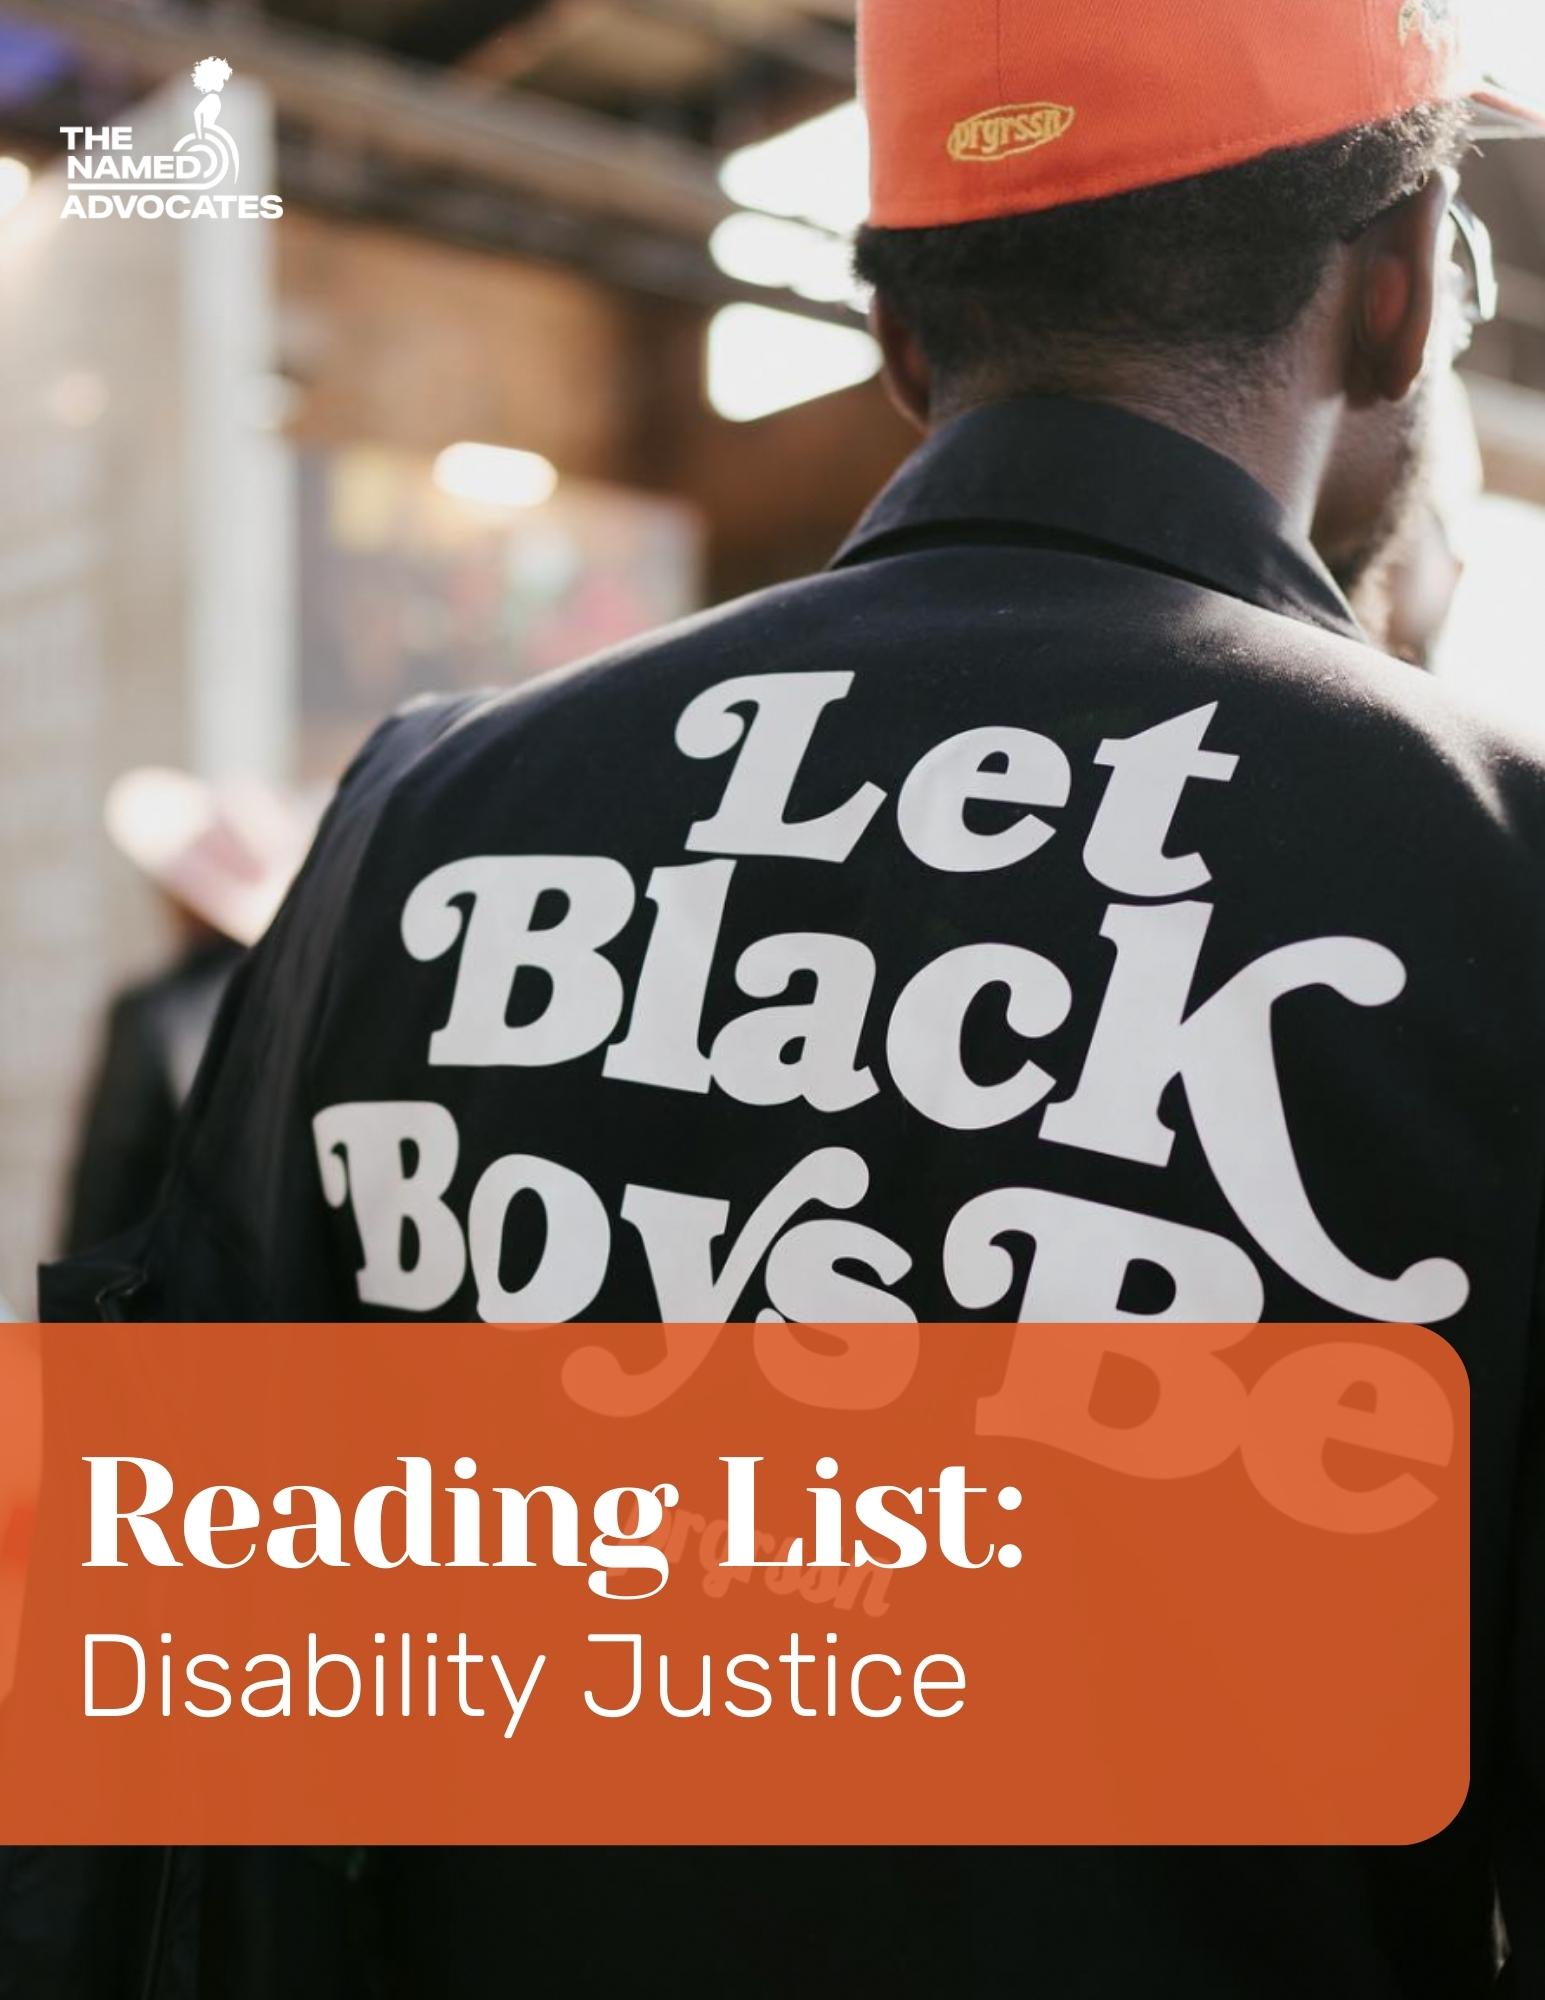 Shows the back of Black man wearing a Black jacket with white letters that say "Let Black Boys Be." There is text at the bottom that says Reading List: Disability Justice